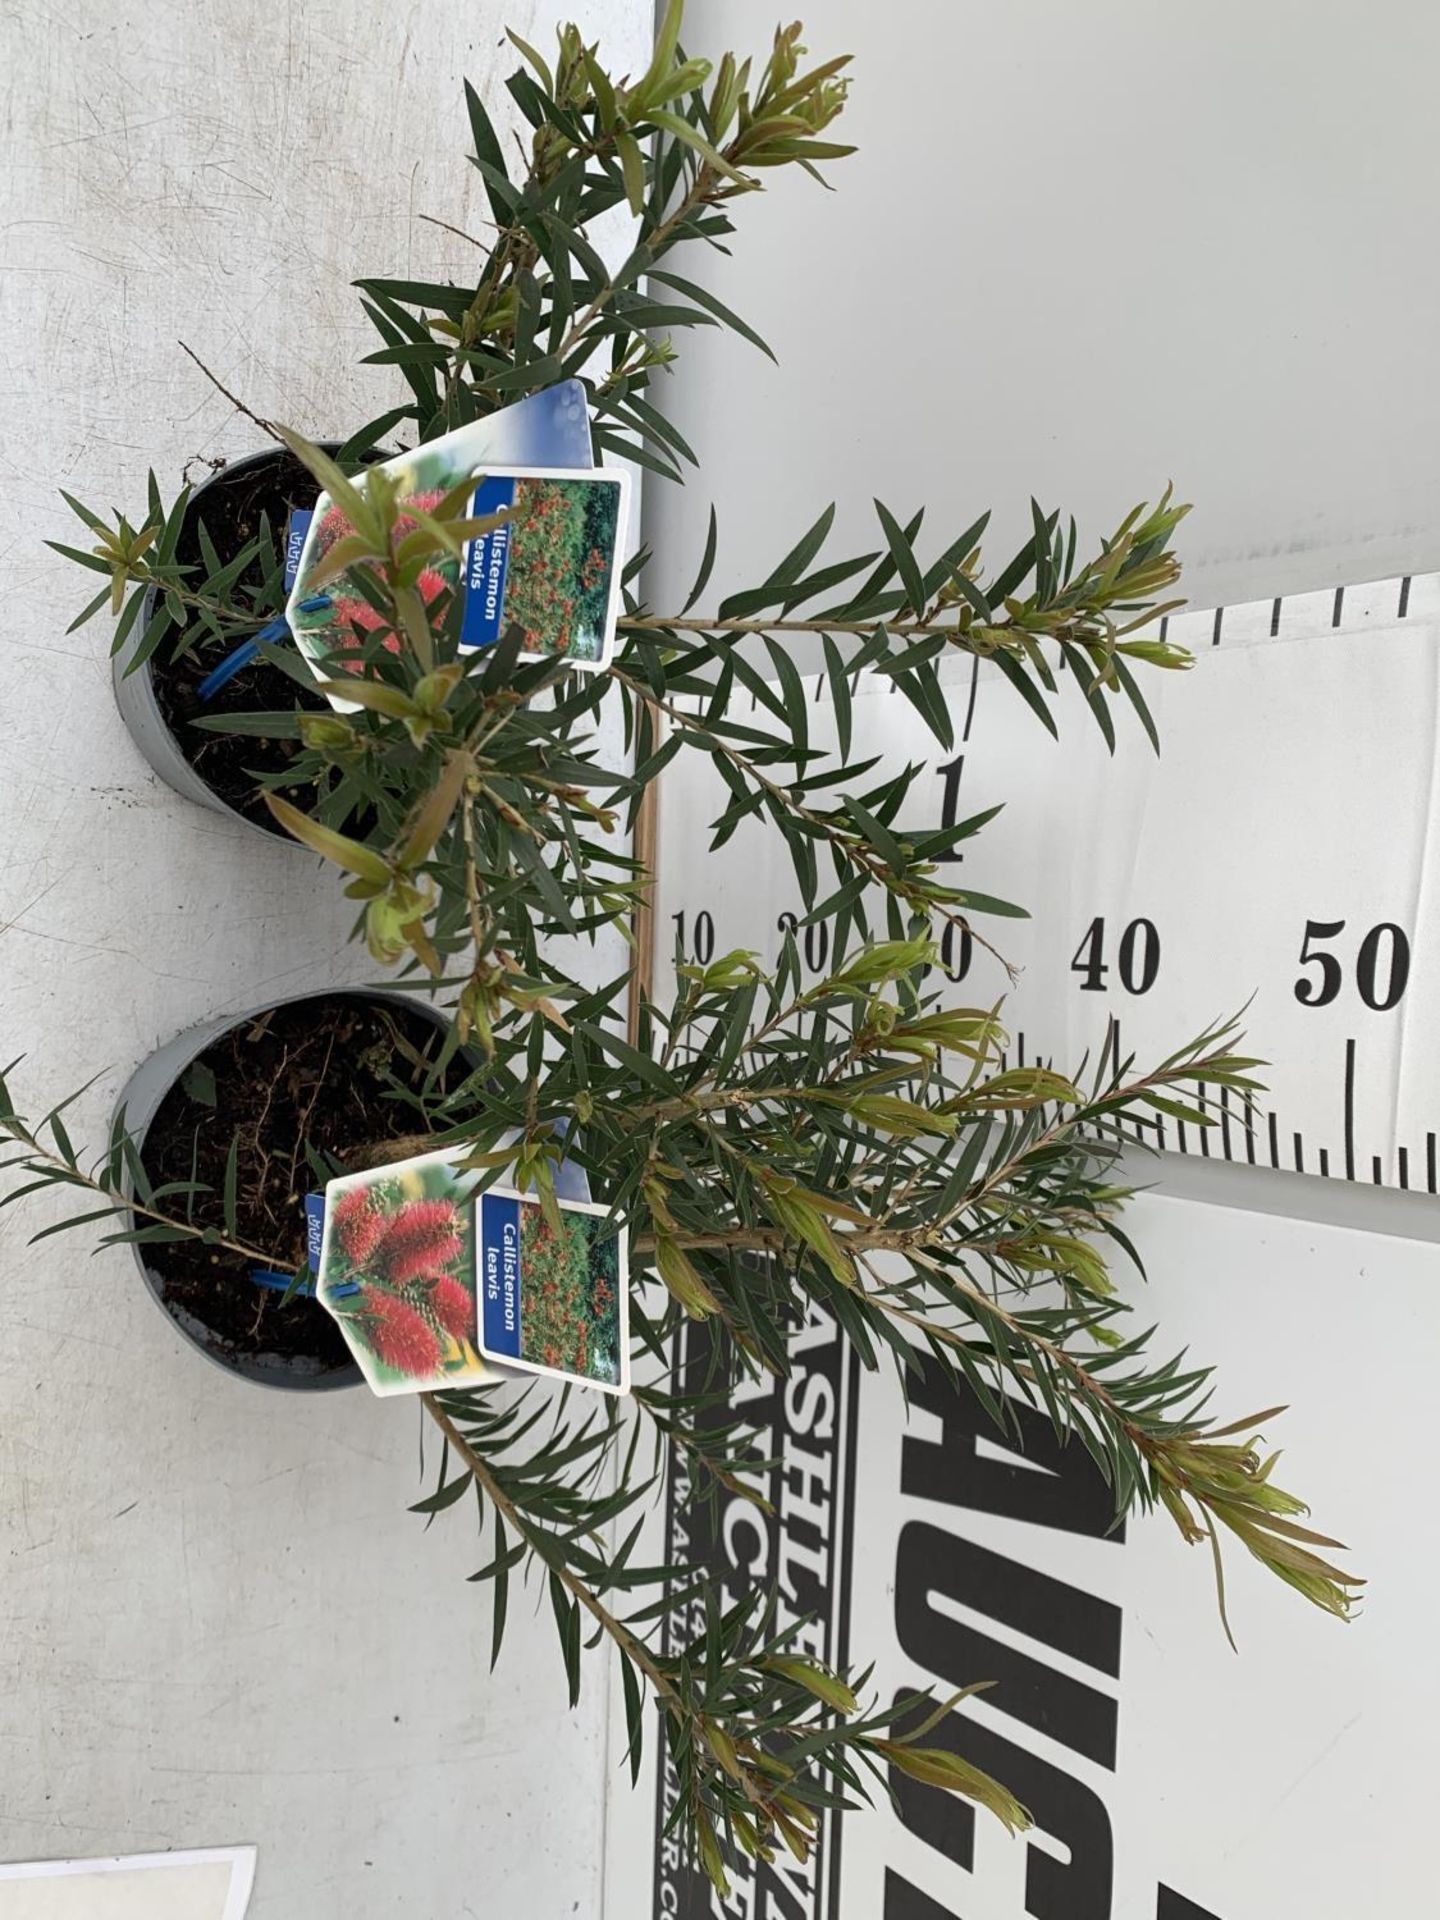 TWO CALLISTEMON LAEVIS IN 2 LTR POTS 50CM TALL PLUS VAT TO BE SOLD FOR THE TWO - Bild 4 aus 10